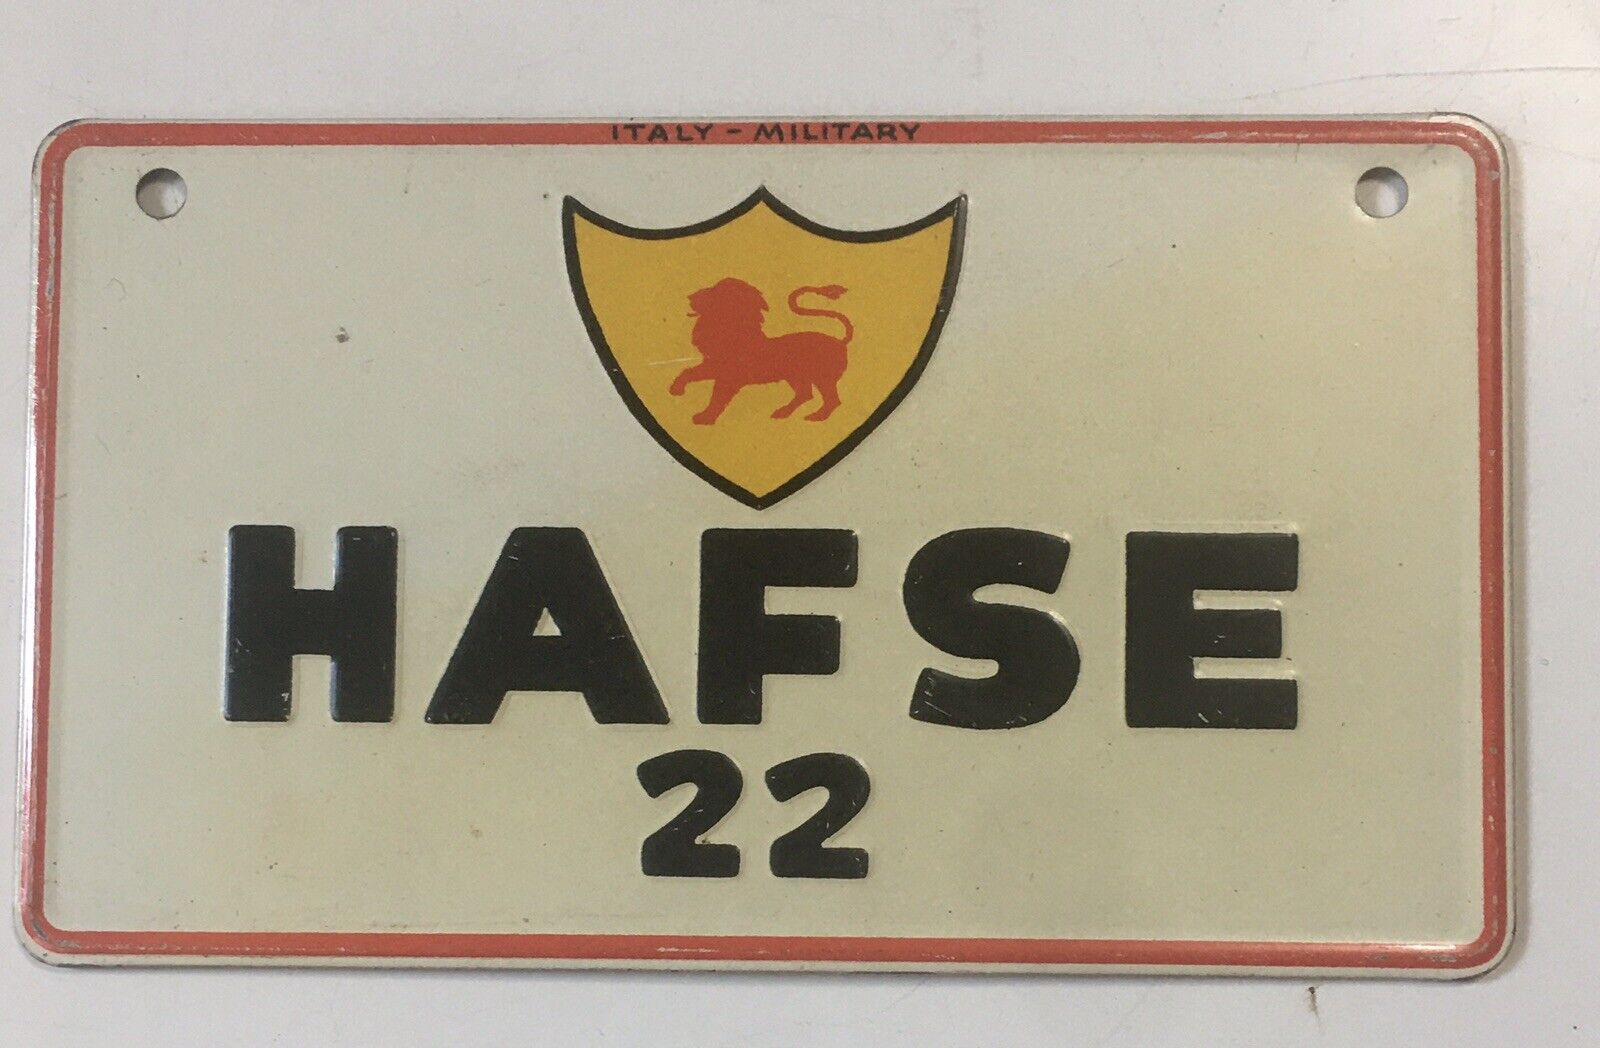 Vintage HAFSE 22 Italy Military Mini Metal License Plate for Bike or Pedal Car